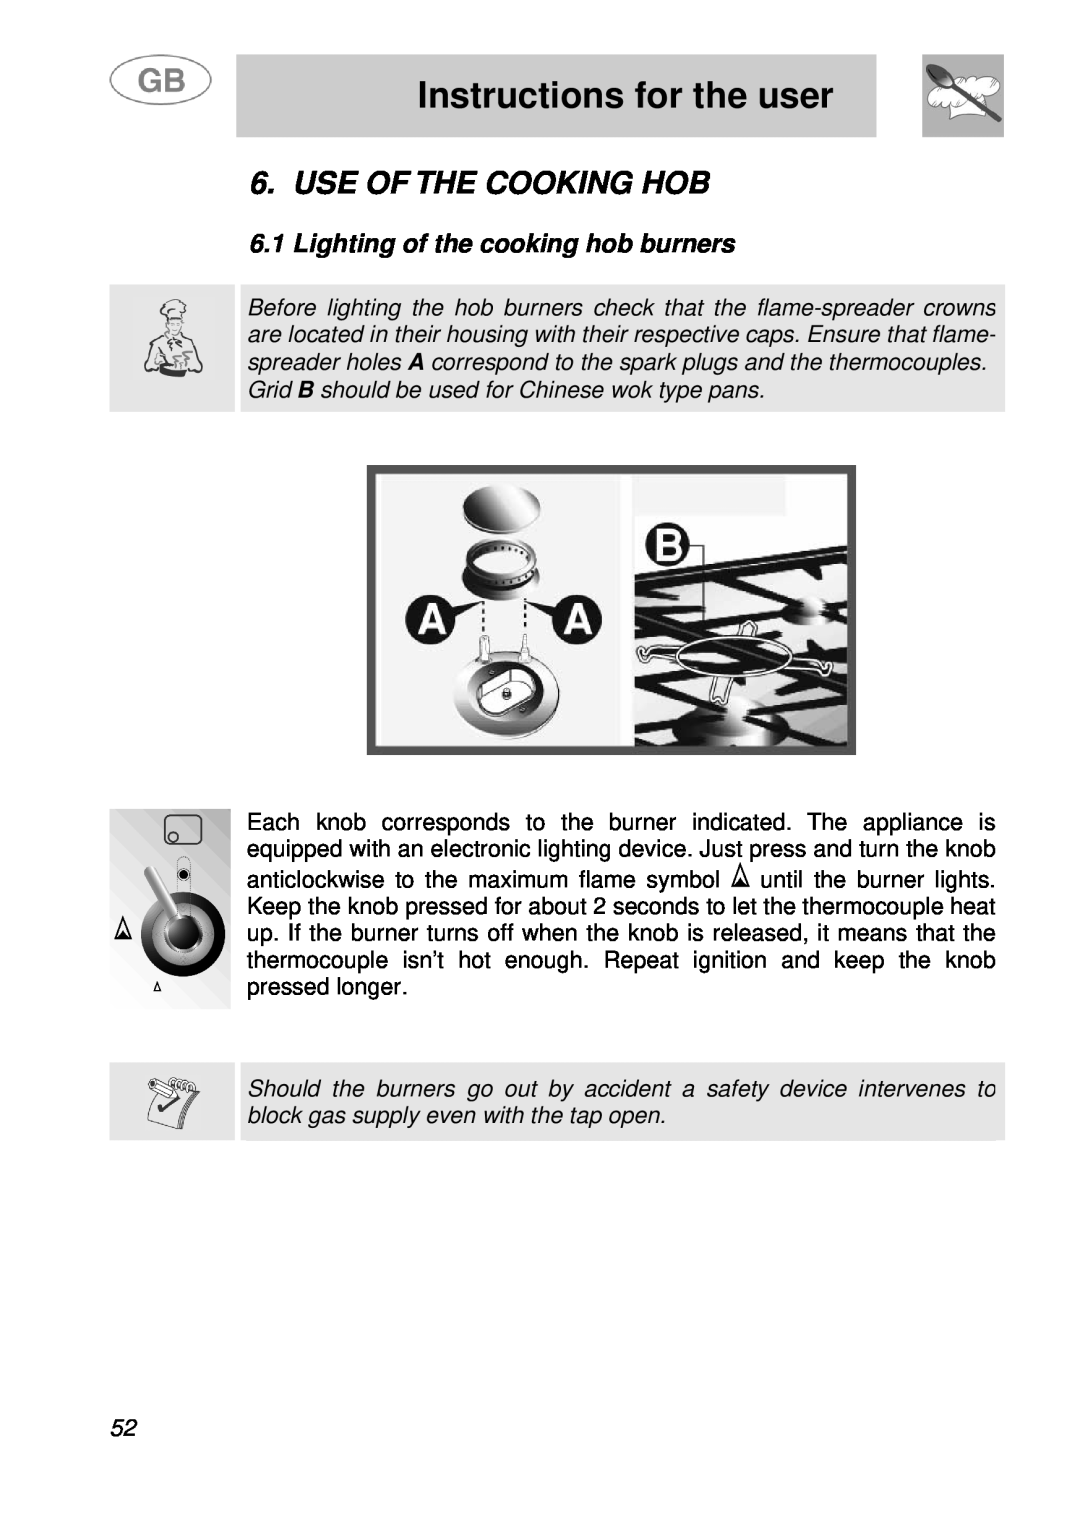 Smeg A41A manual Use Of The Cooking Hob, Lighting of the cooking hob burners, Instructions for the user 